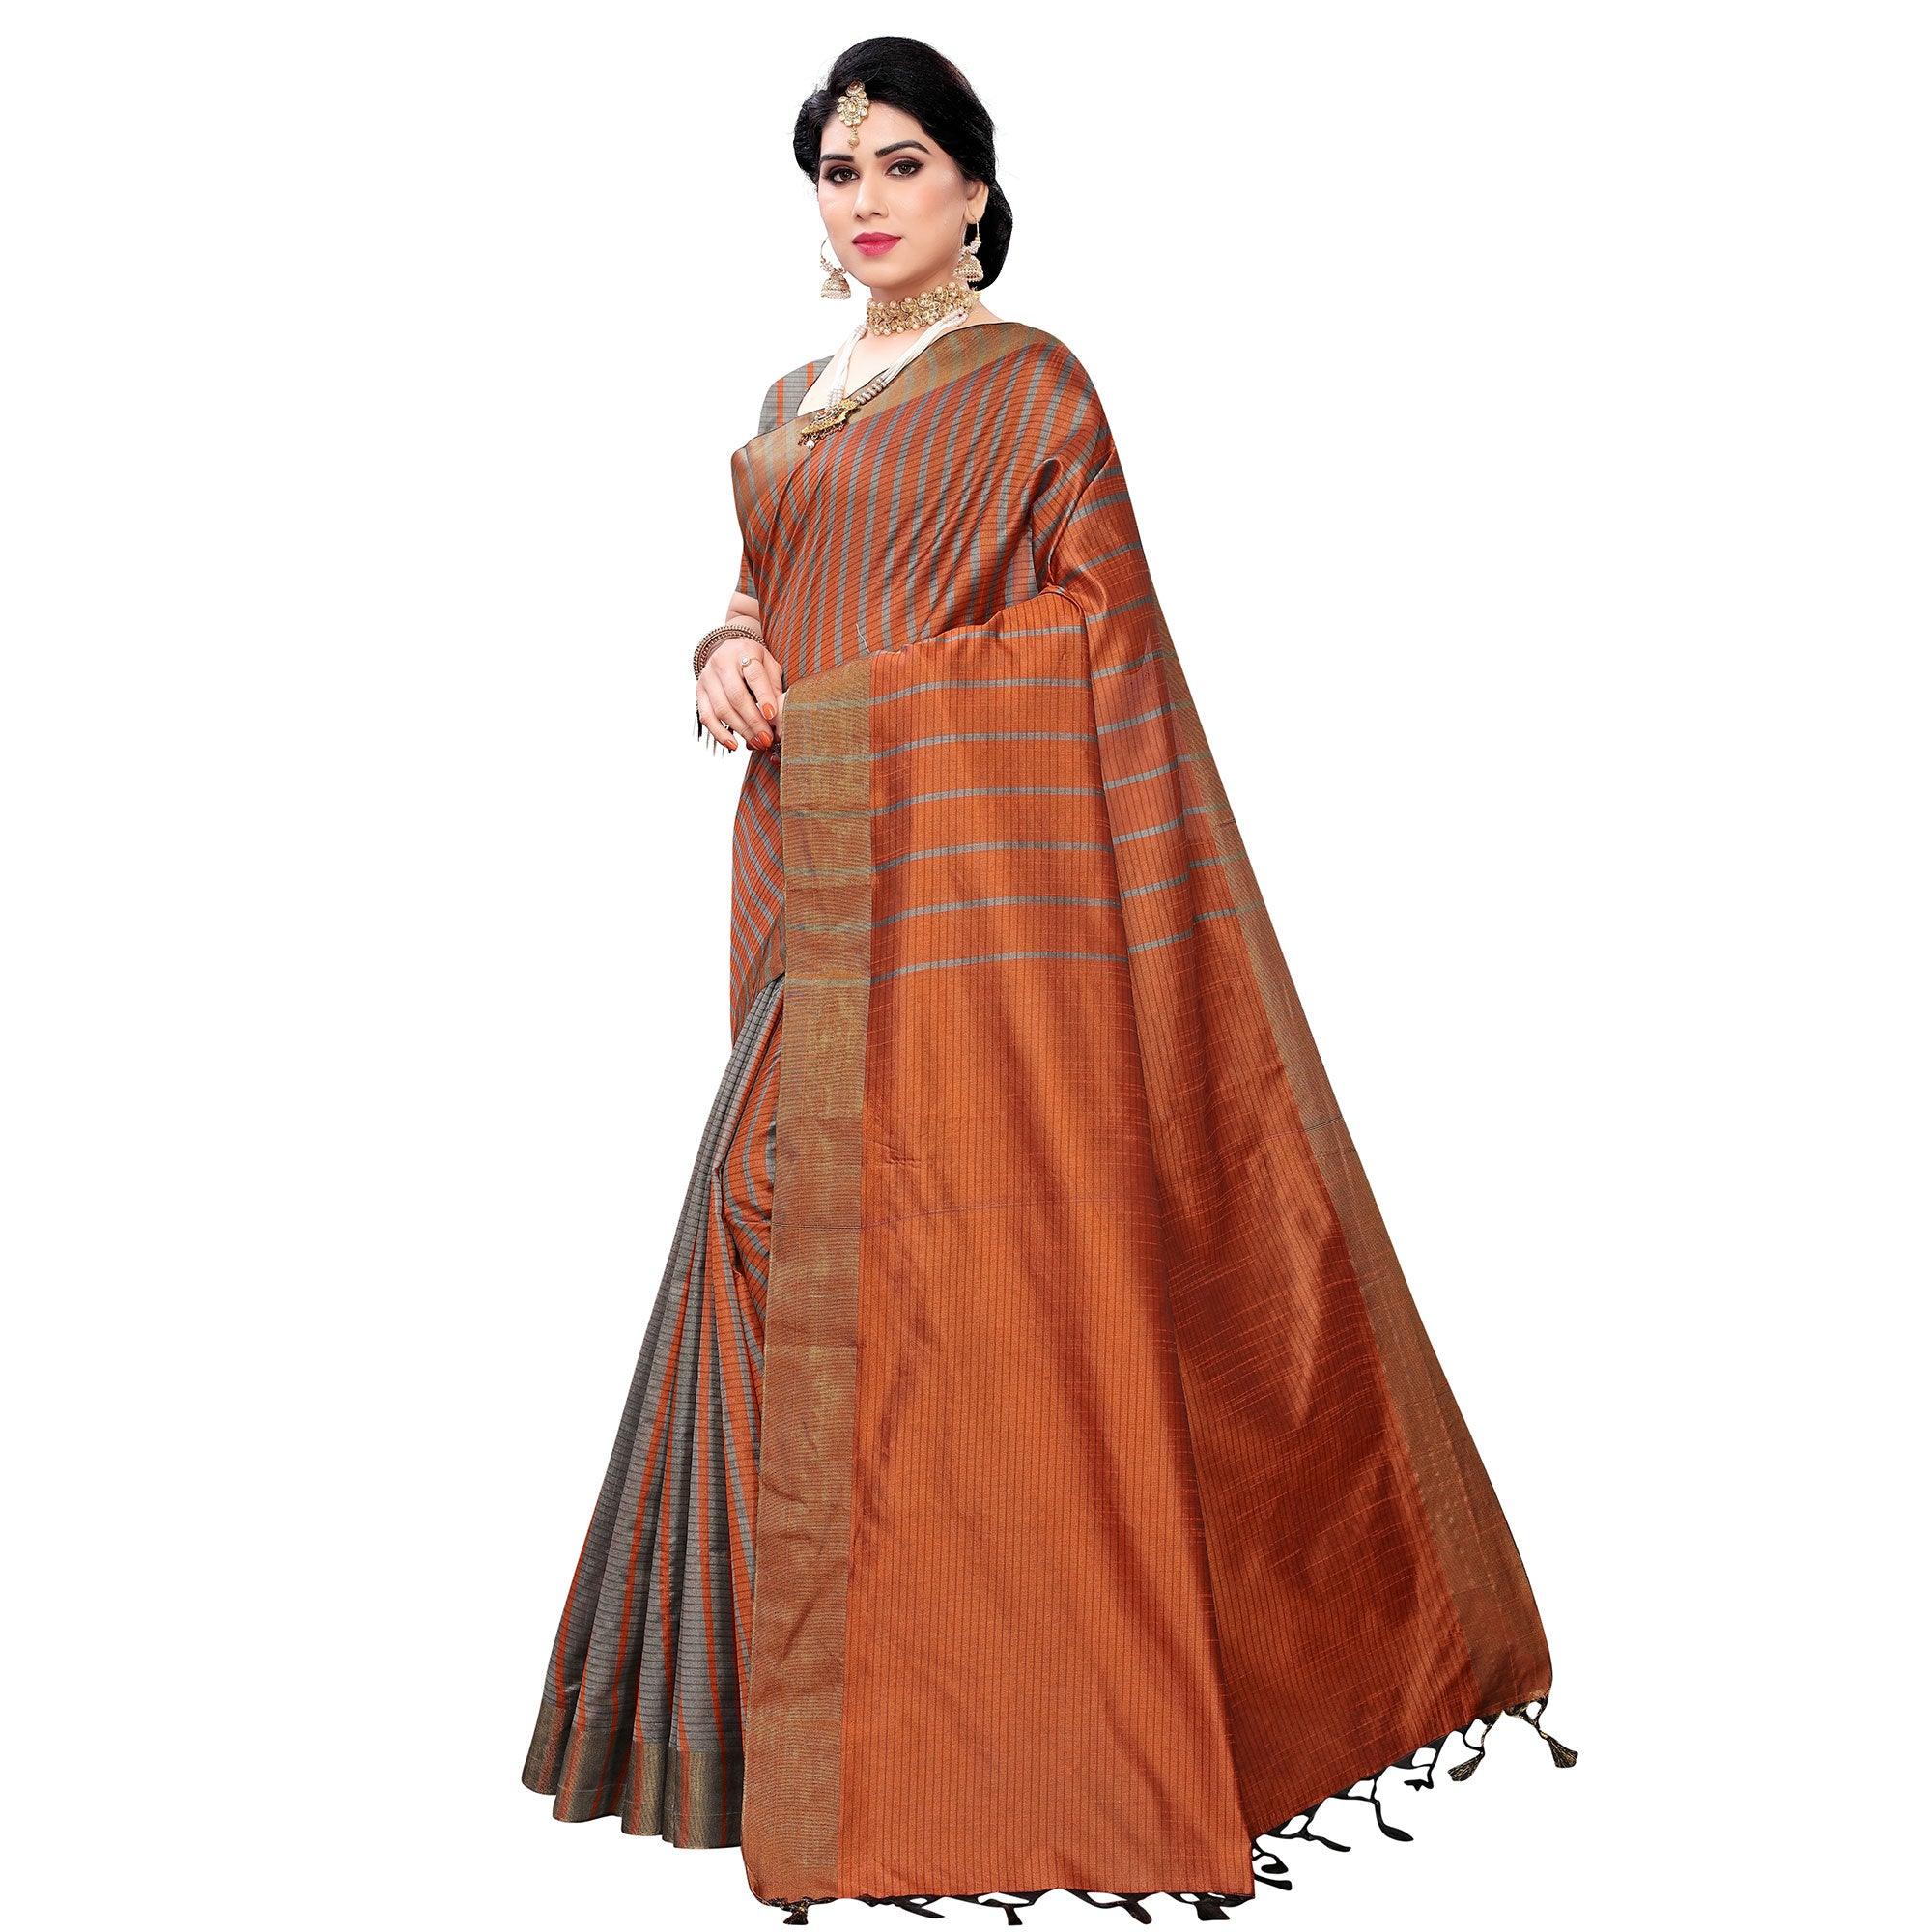 Surpassing Brown Colored Festive Wear Cotton Silk Saree With Tassels - Peachmode